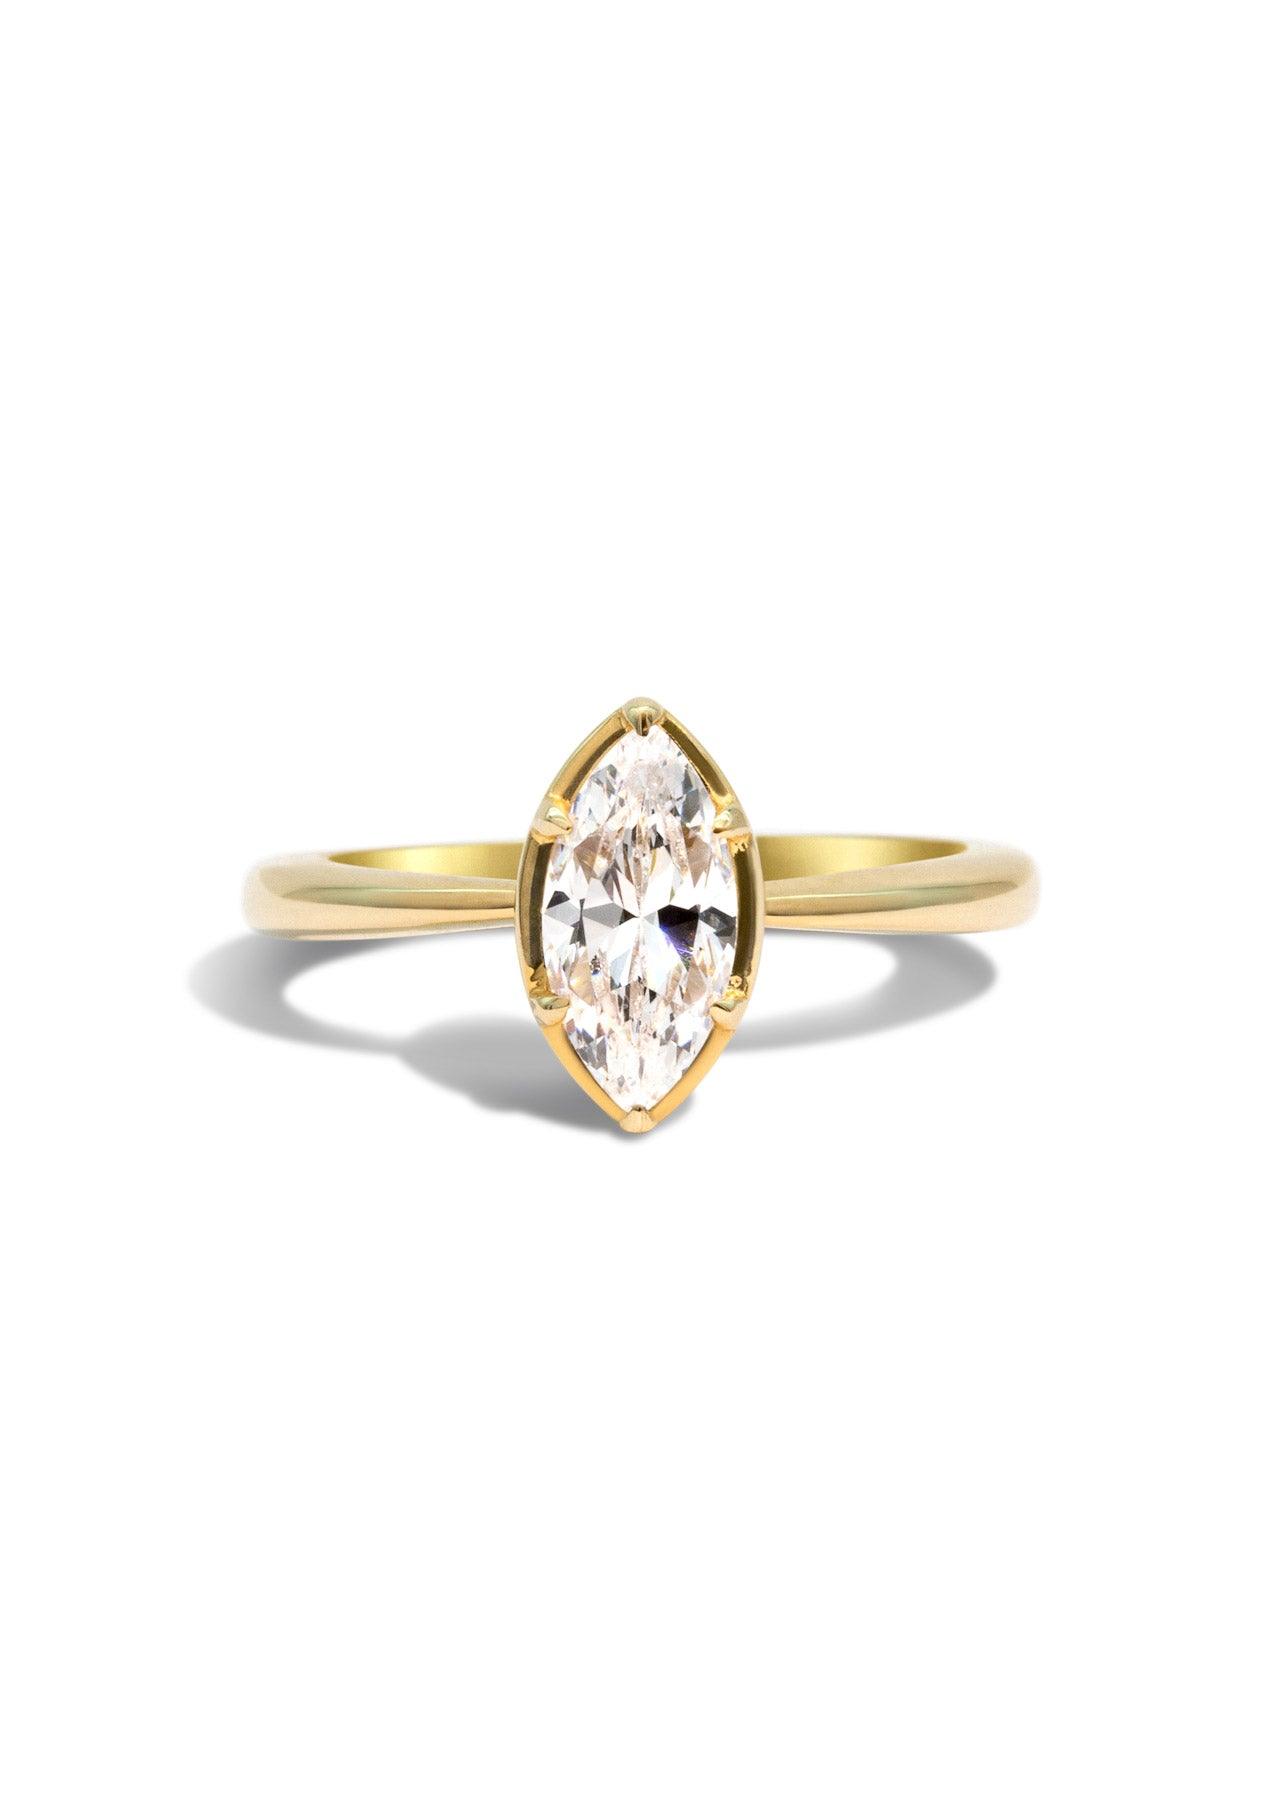 The Mabel Yellow Gold Cultured Diamond Ring